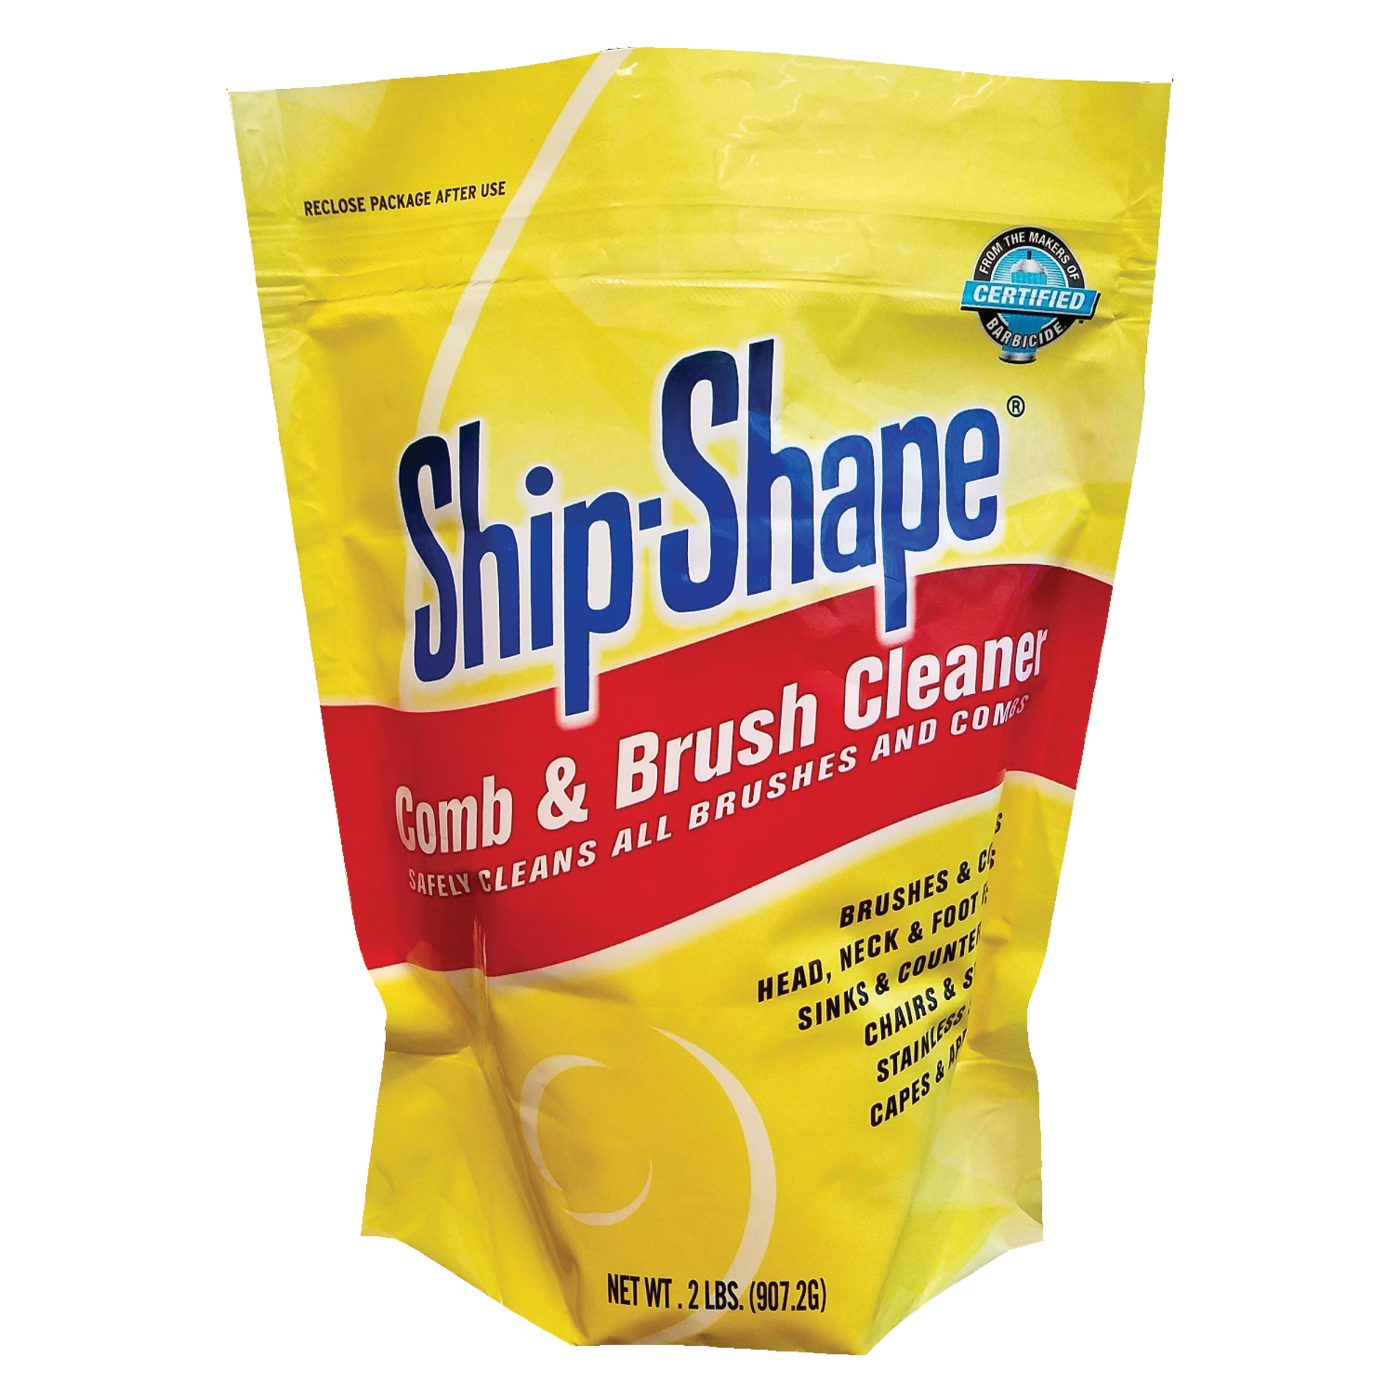 Ship-Shape® Comb and Brush Cleaner